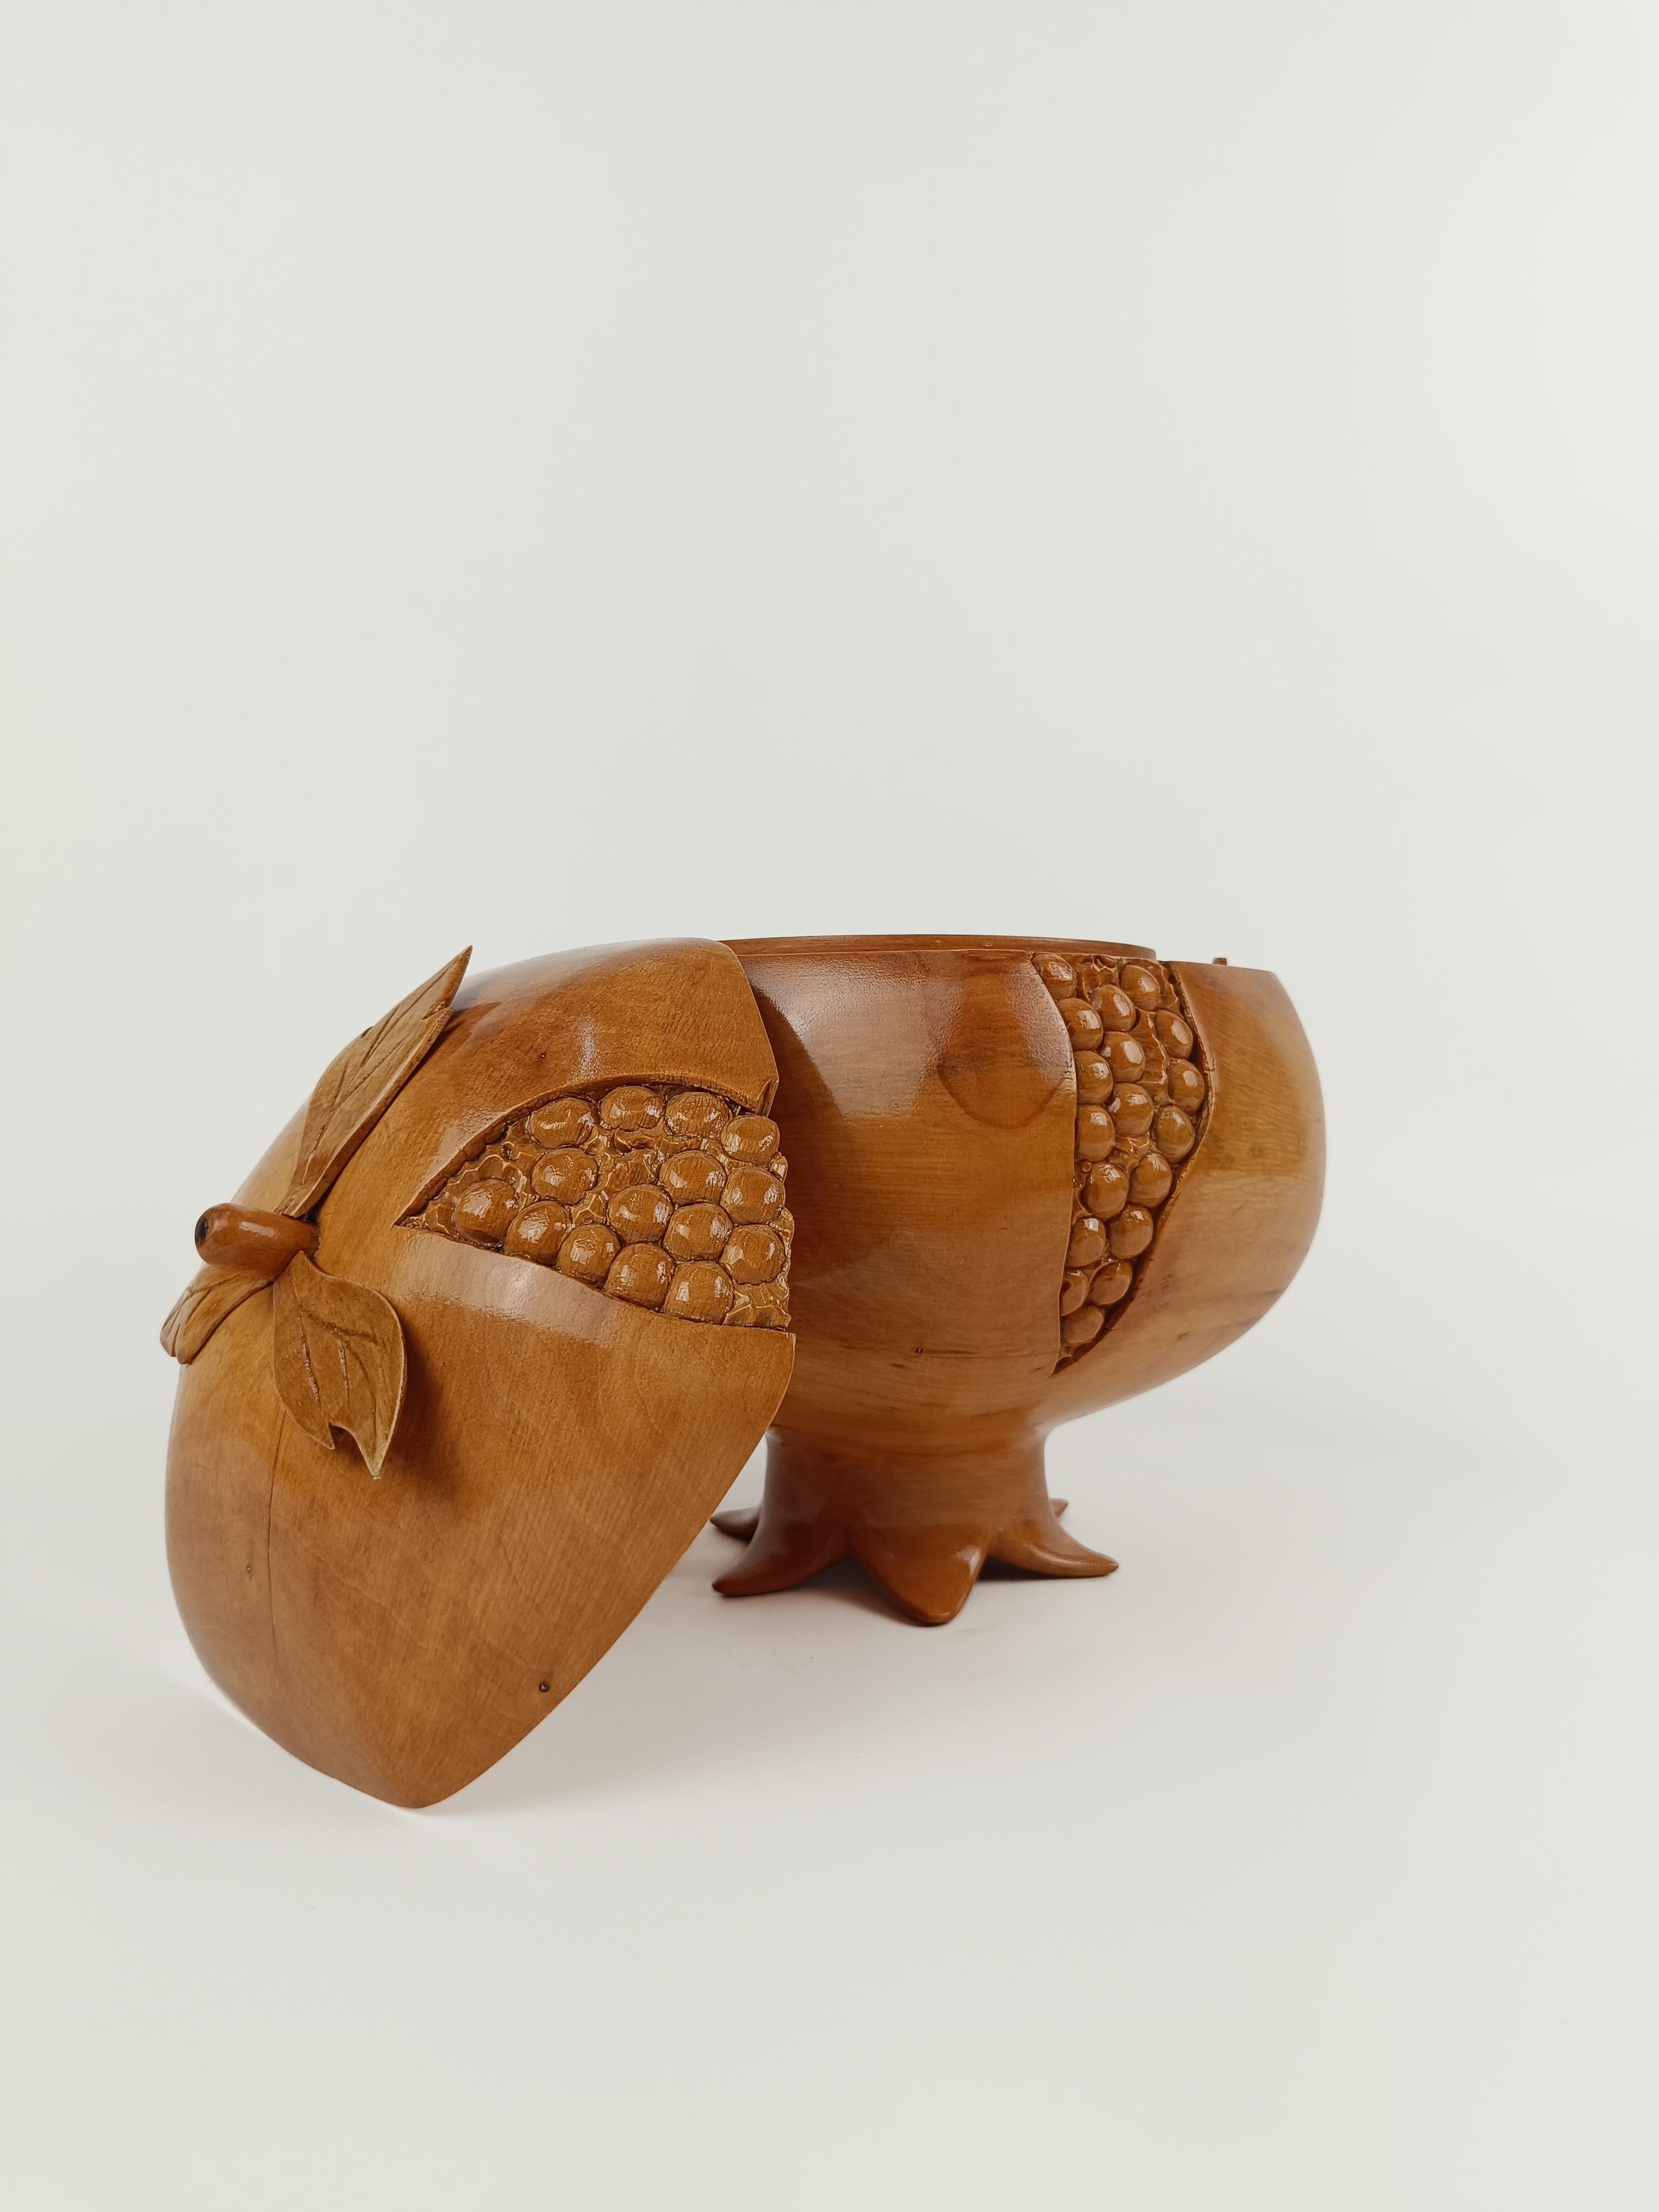 Sculptural Vintage Ice Bucket in maple wood carved in the shape of a pomegranate 1